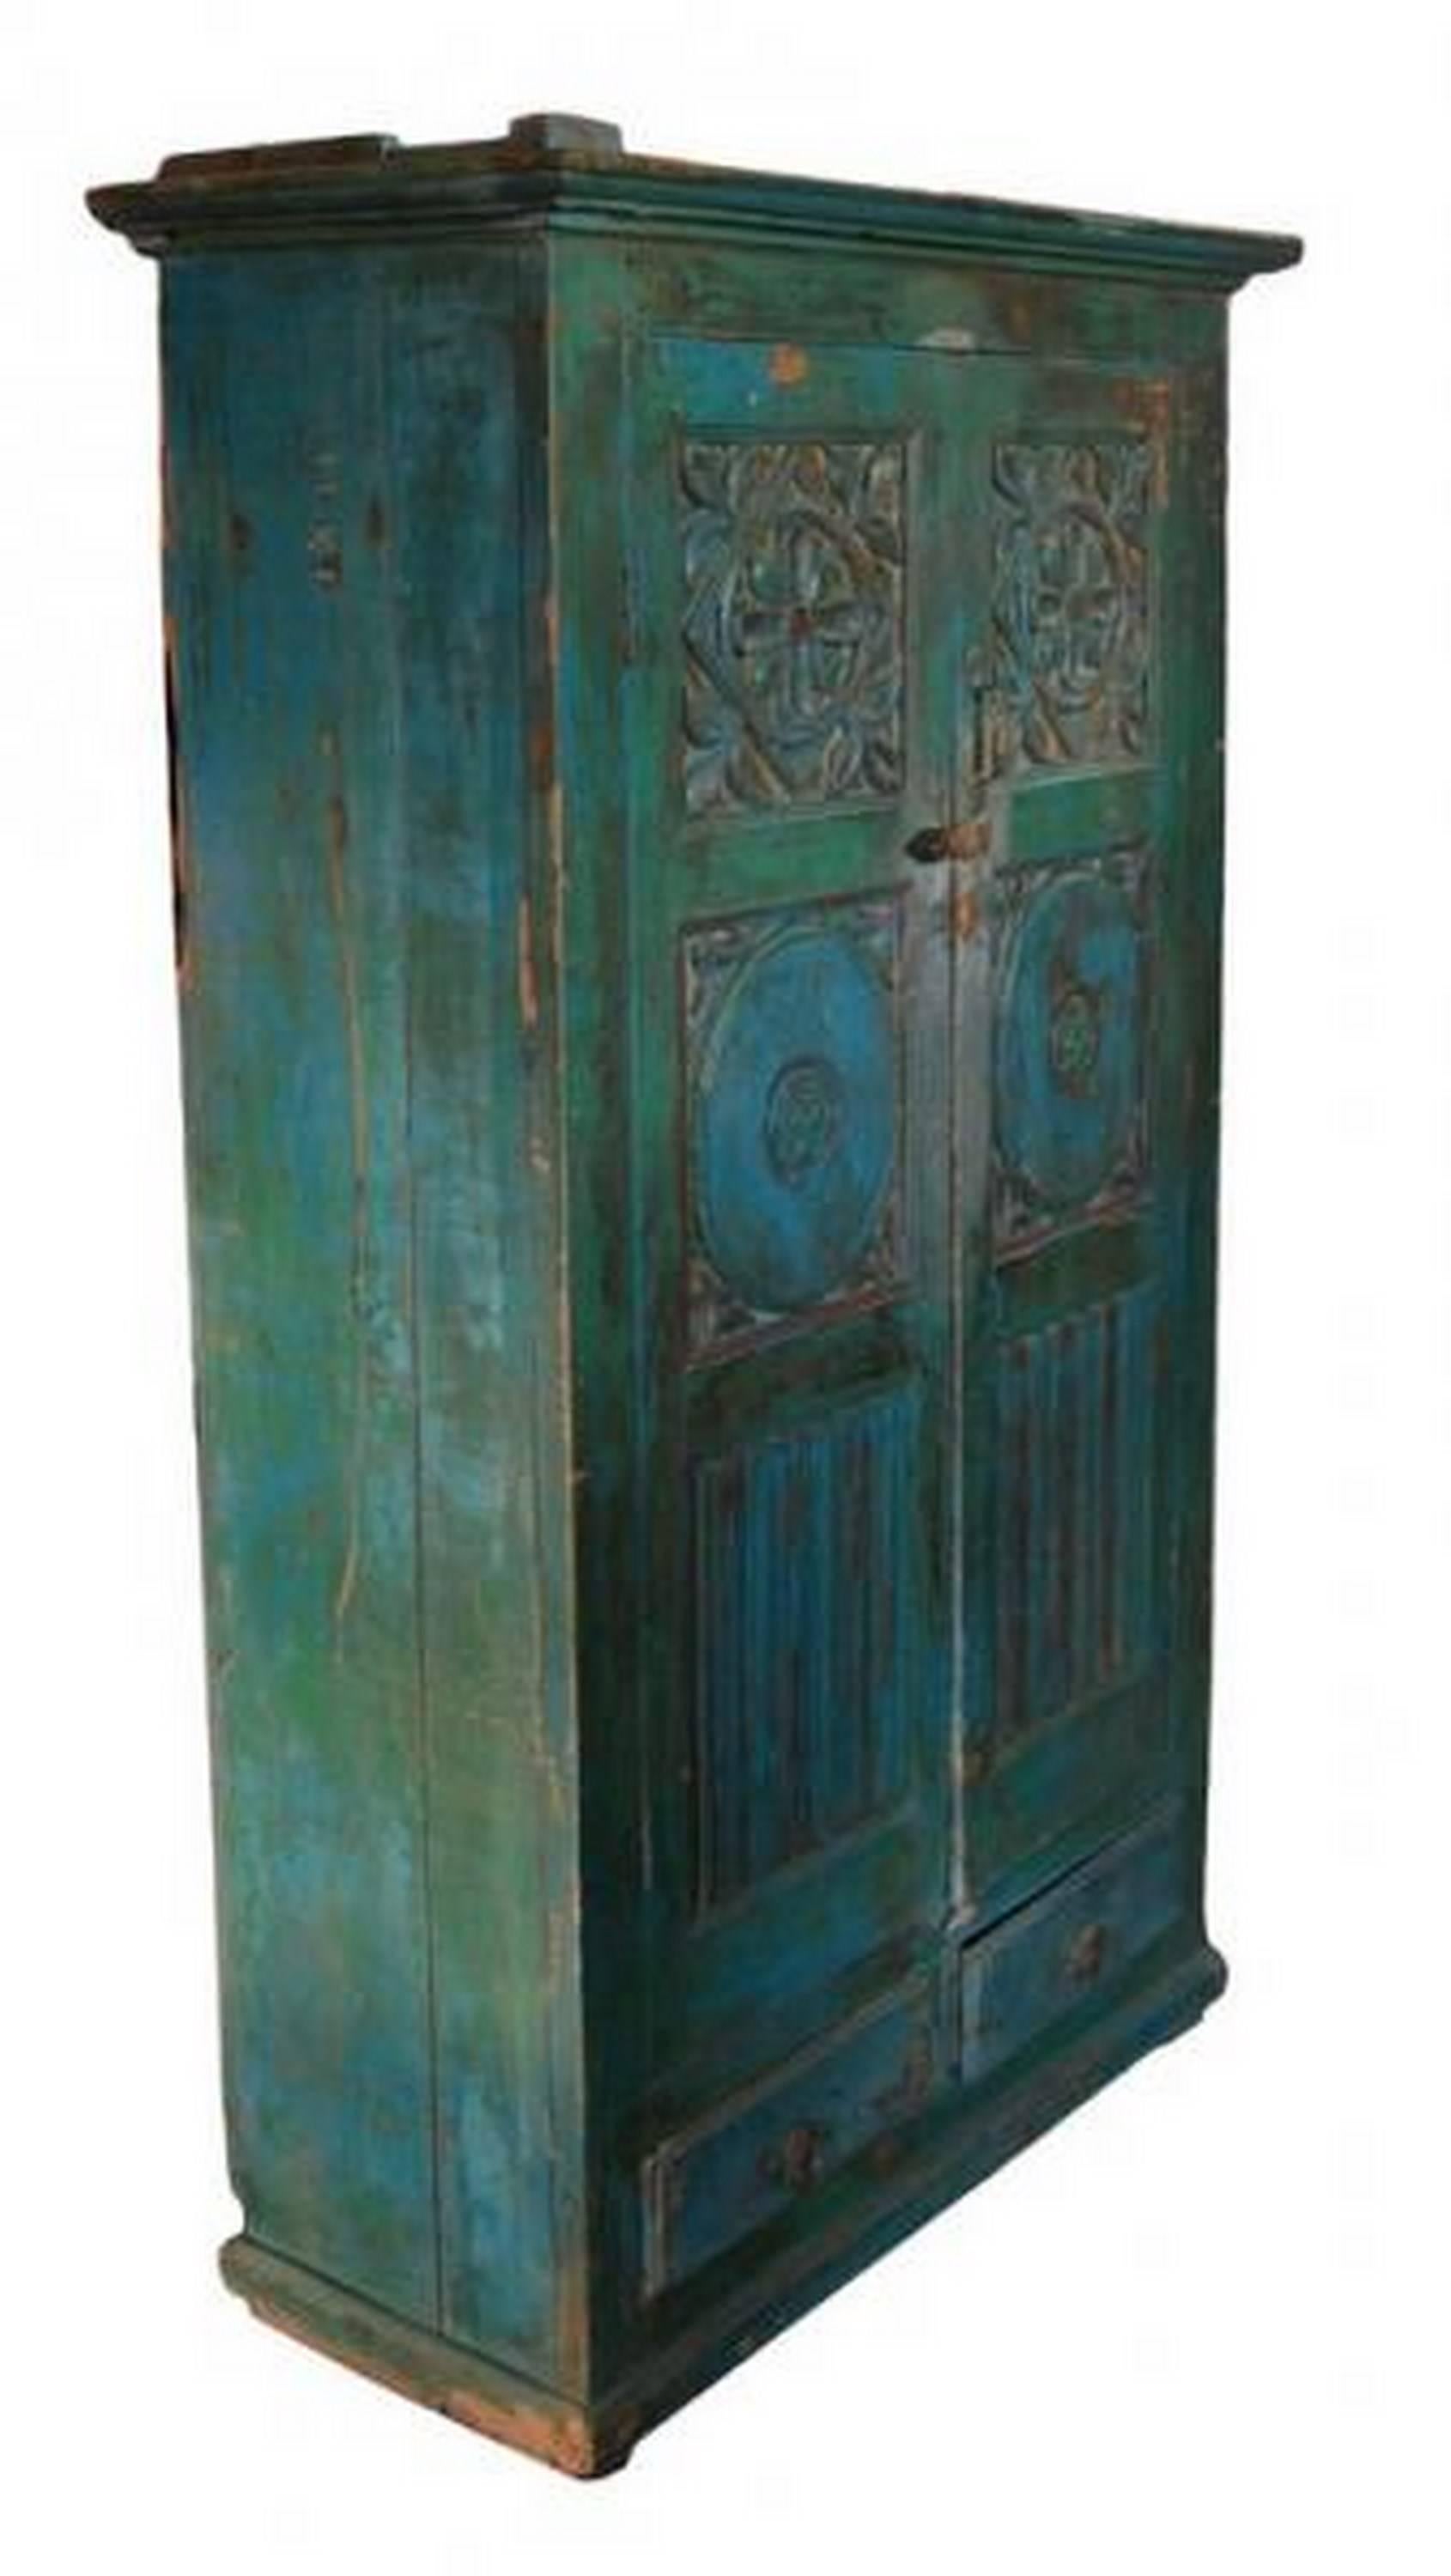 An early 20th century Indian painted cabinet with traditional hand carved motifs.  This painted hand-carved floral motifs cabinet comes from Goa, India, which was a Portuguese colony for 450 years until it was annexed by India in 1961.  This